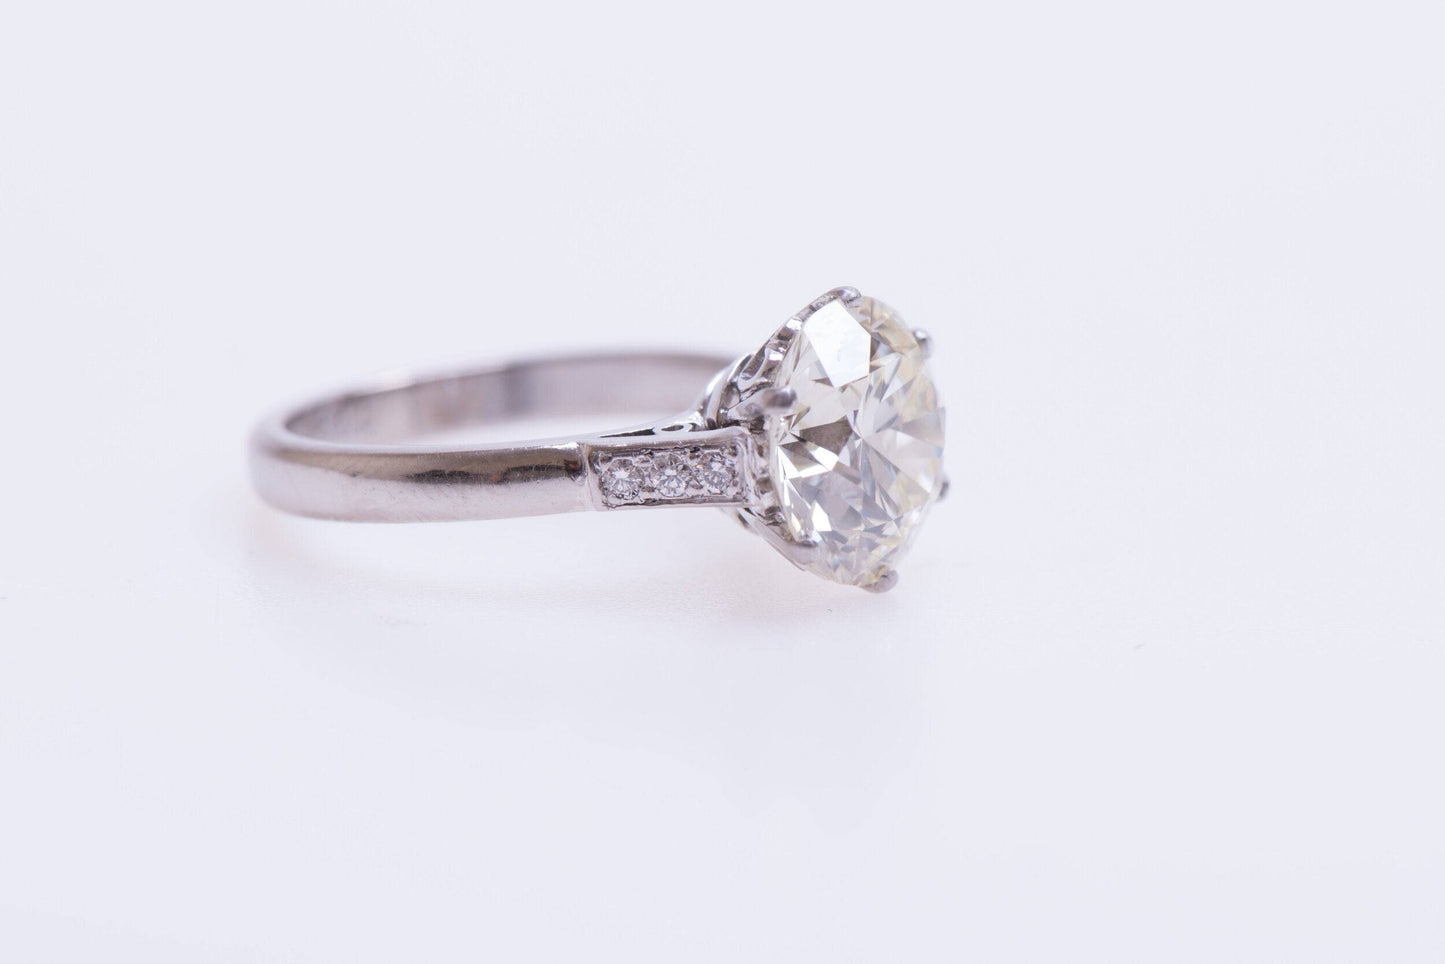 A 3.66 Carats Diamond Solitaire Ring mounted in Platinum, Circa 1950 - Robin Haydock Antiques